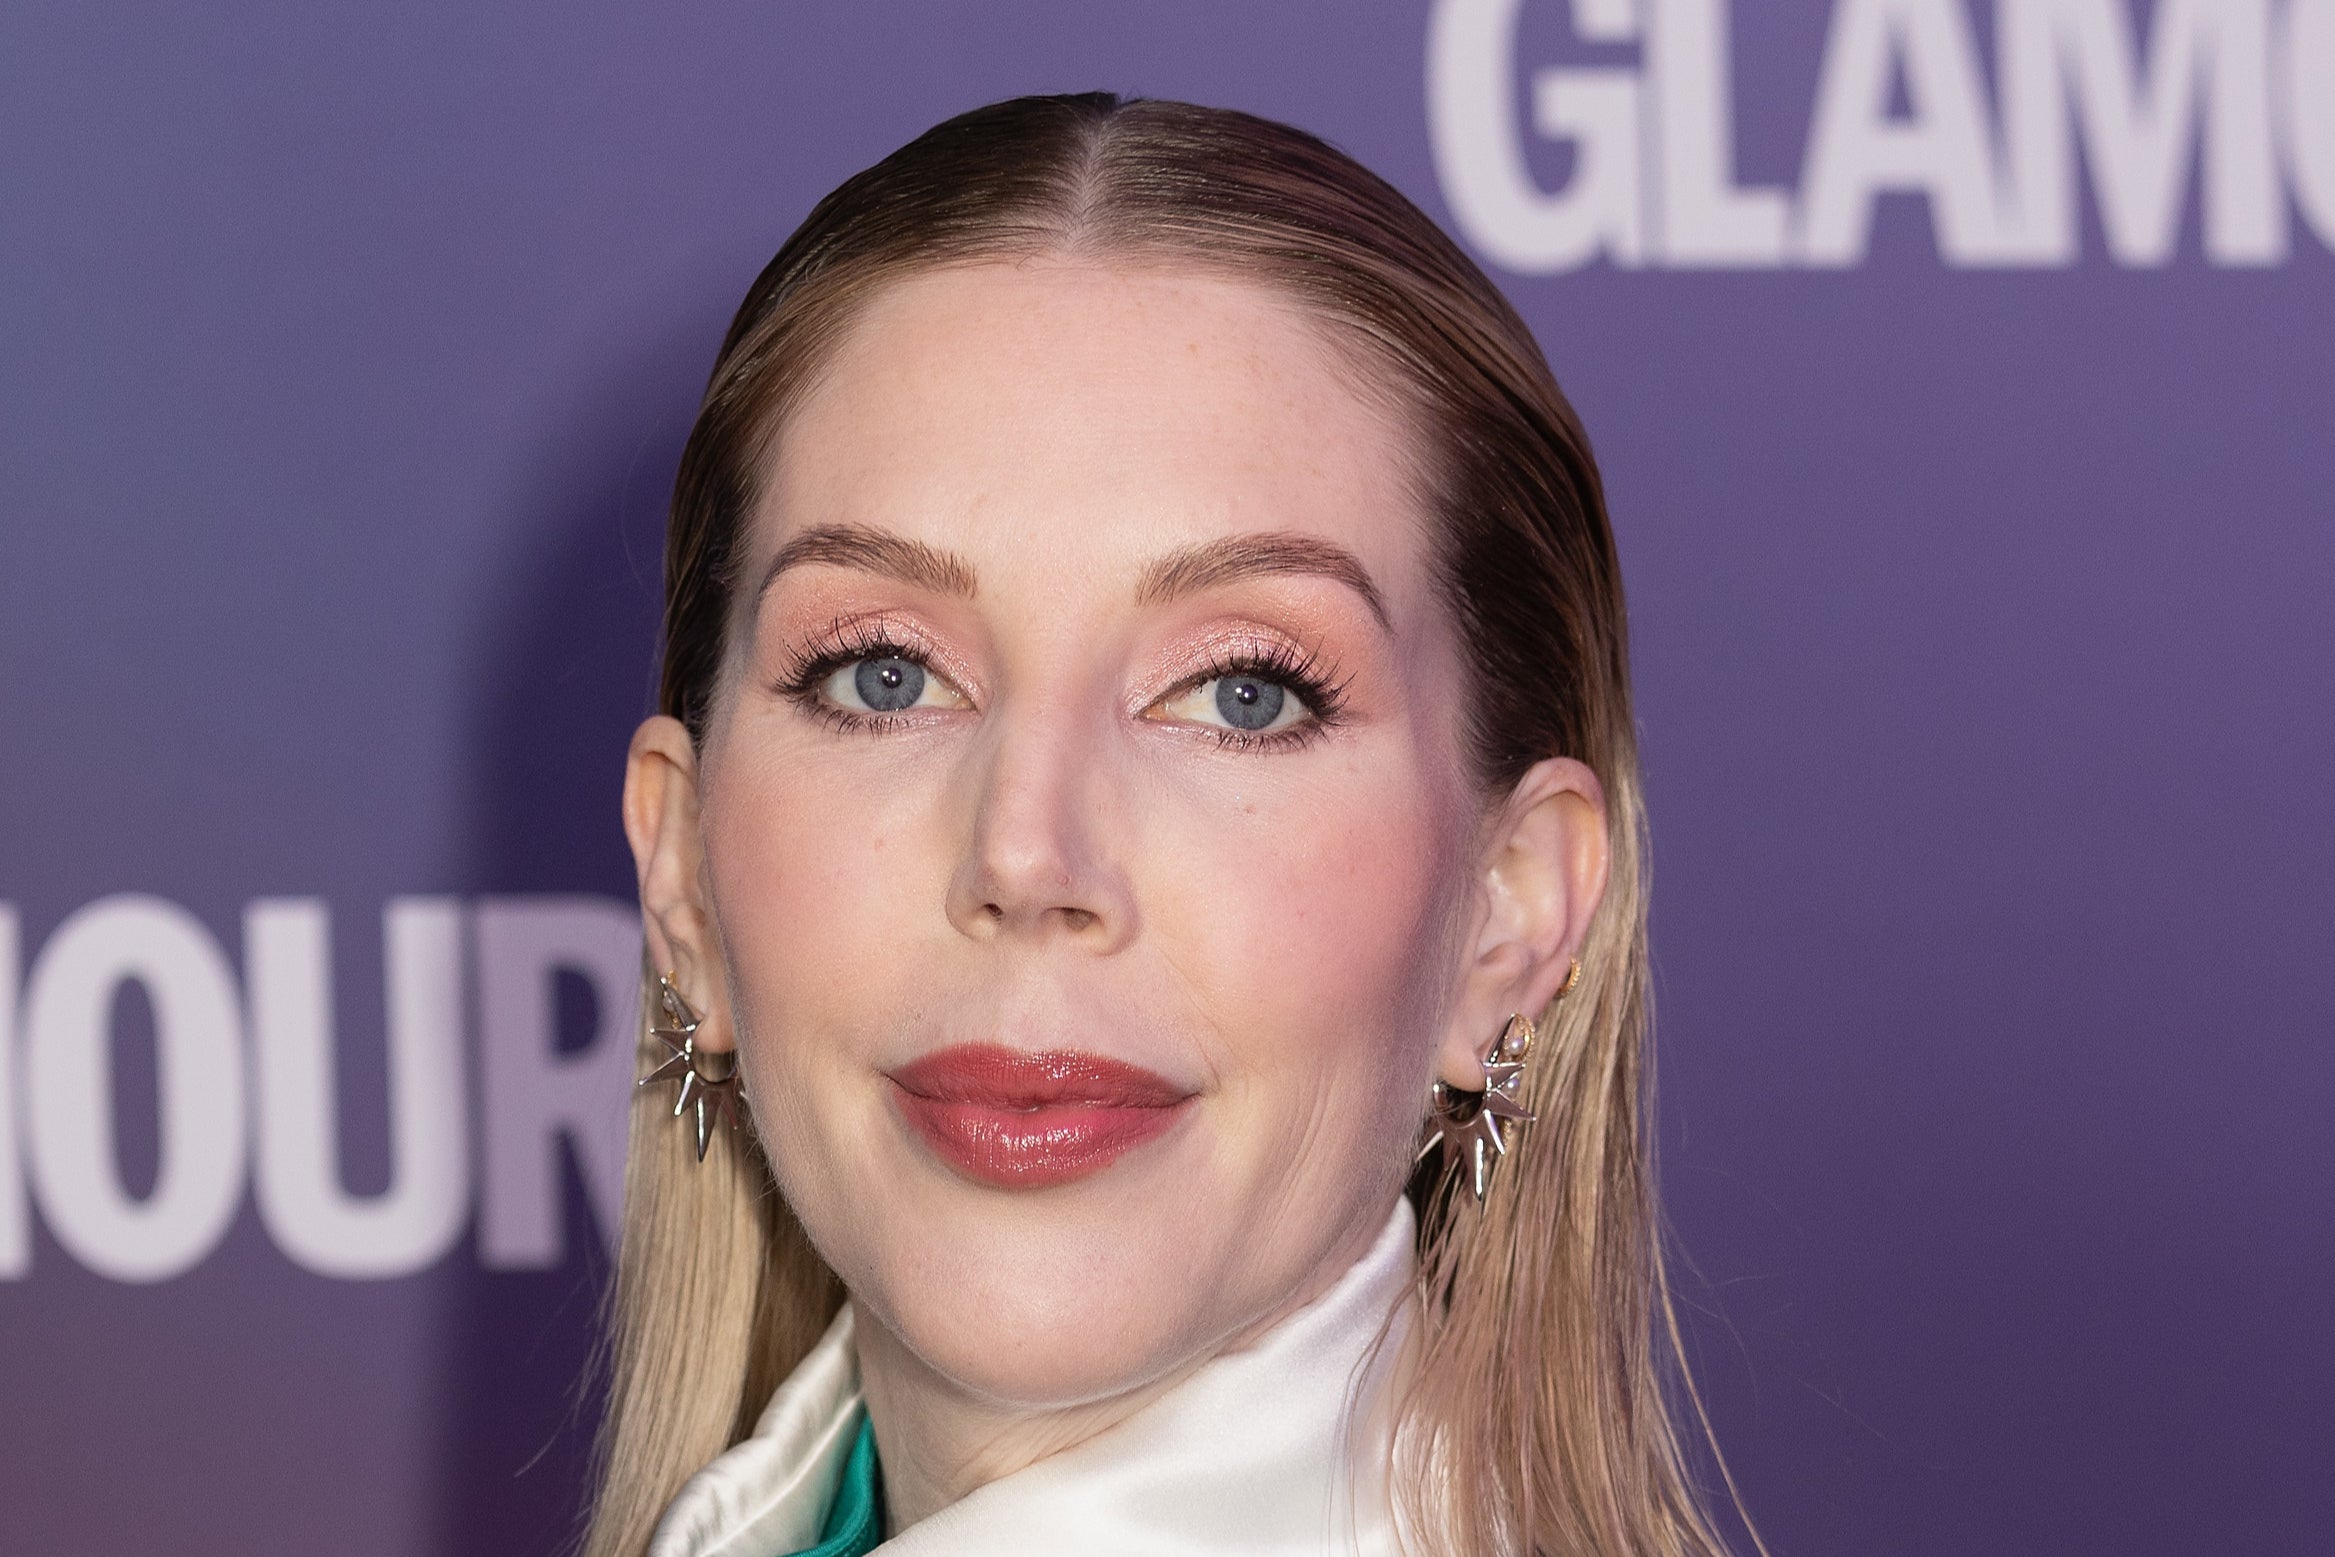 Pascoe has previously exchanged remarks with fellow stand-up Katherine Ryan about a ‘known predator’ in the comedy industry